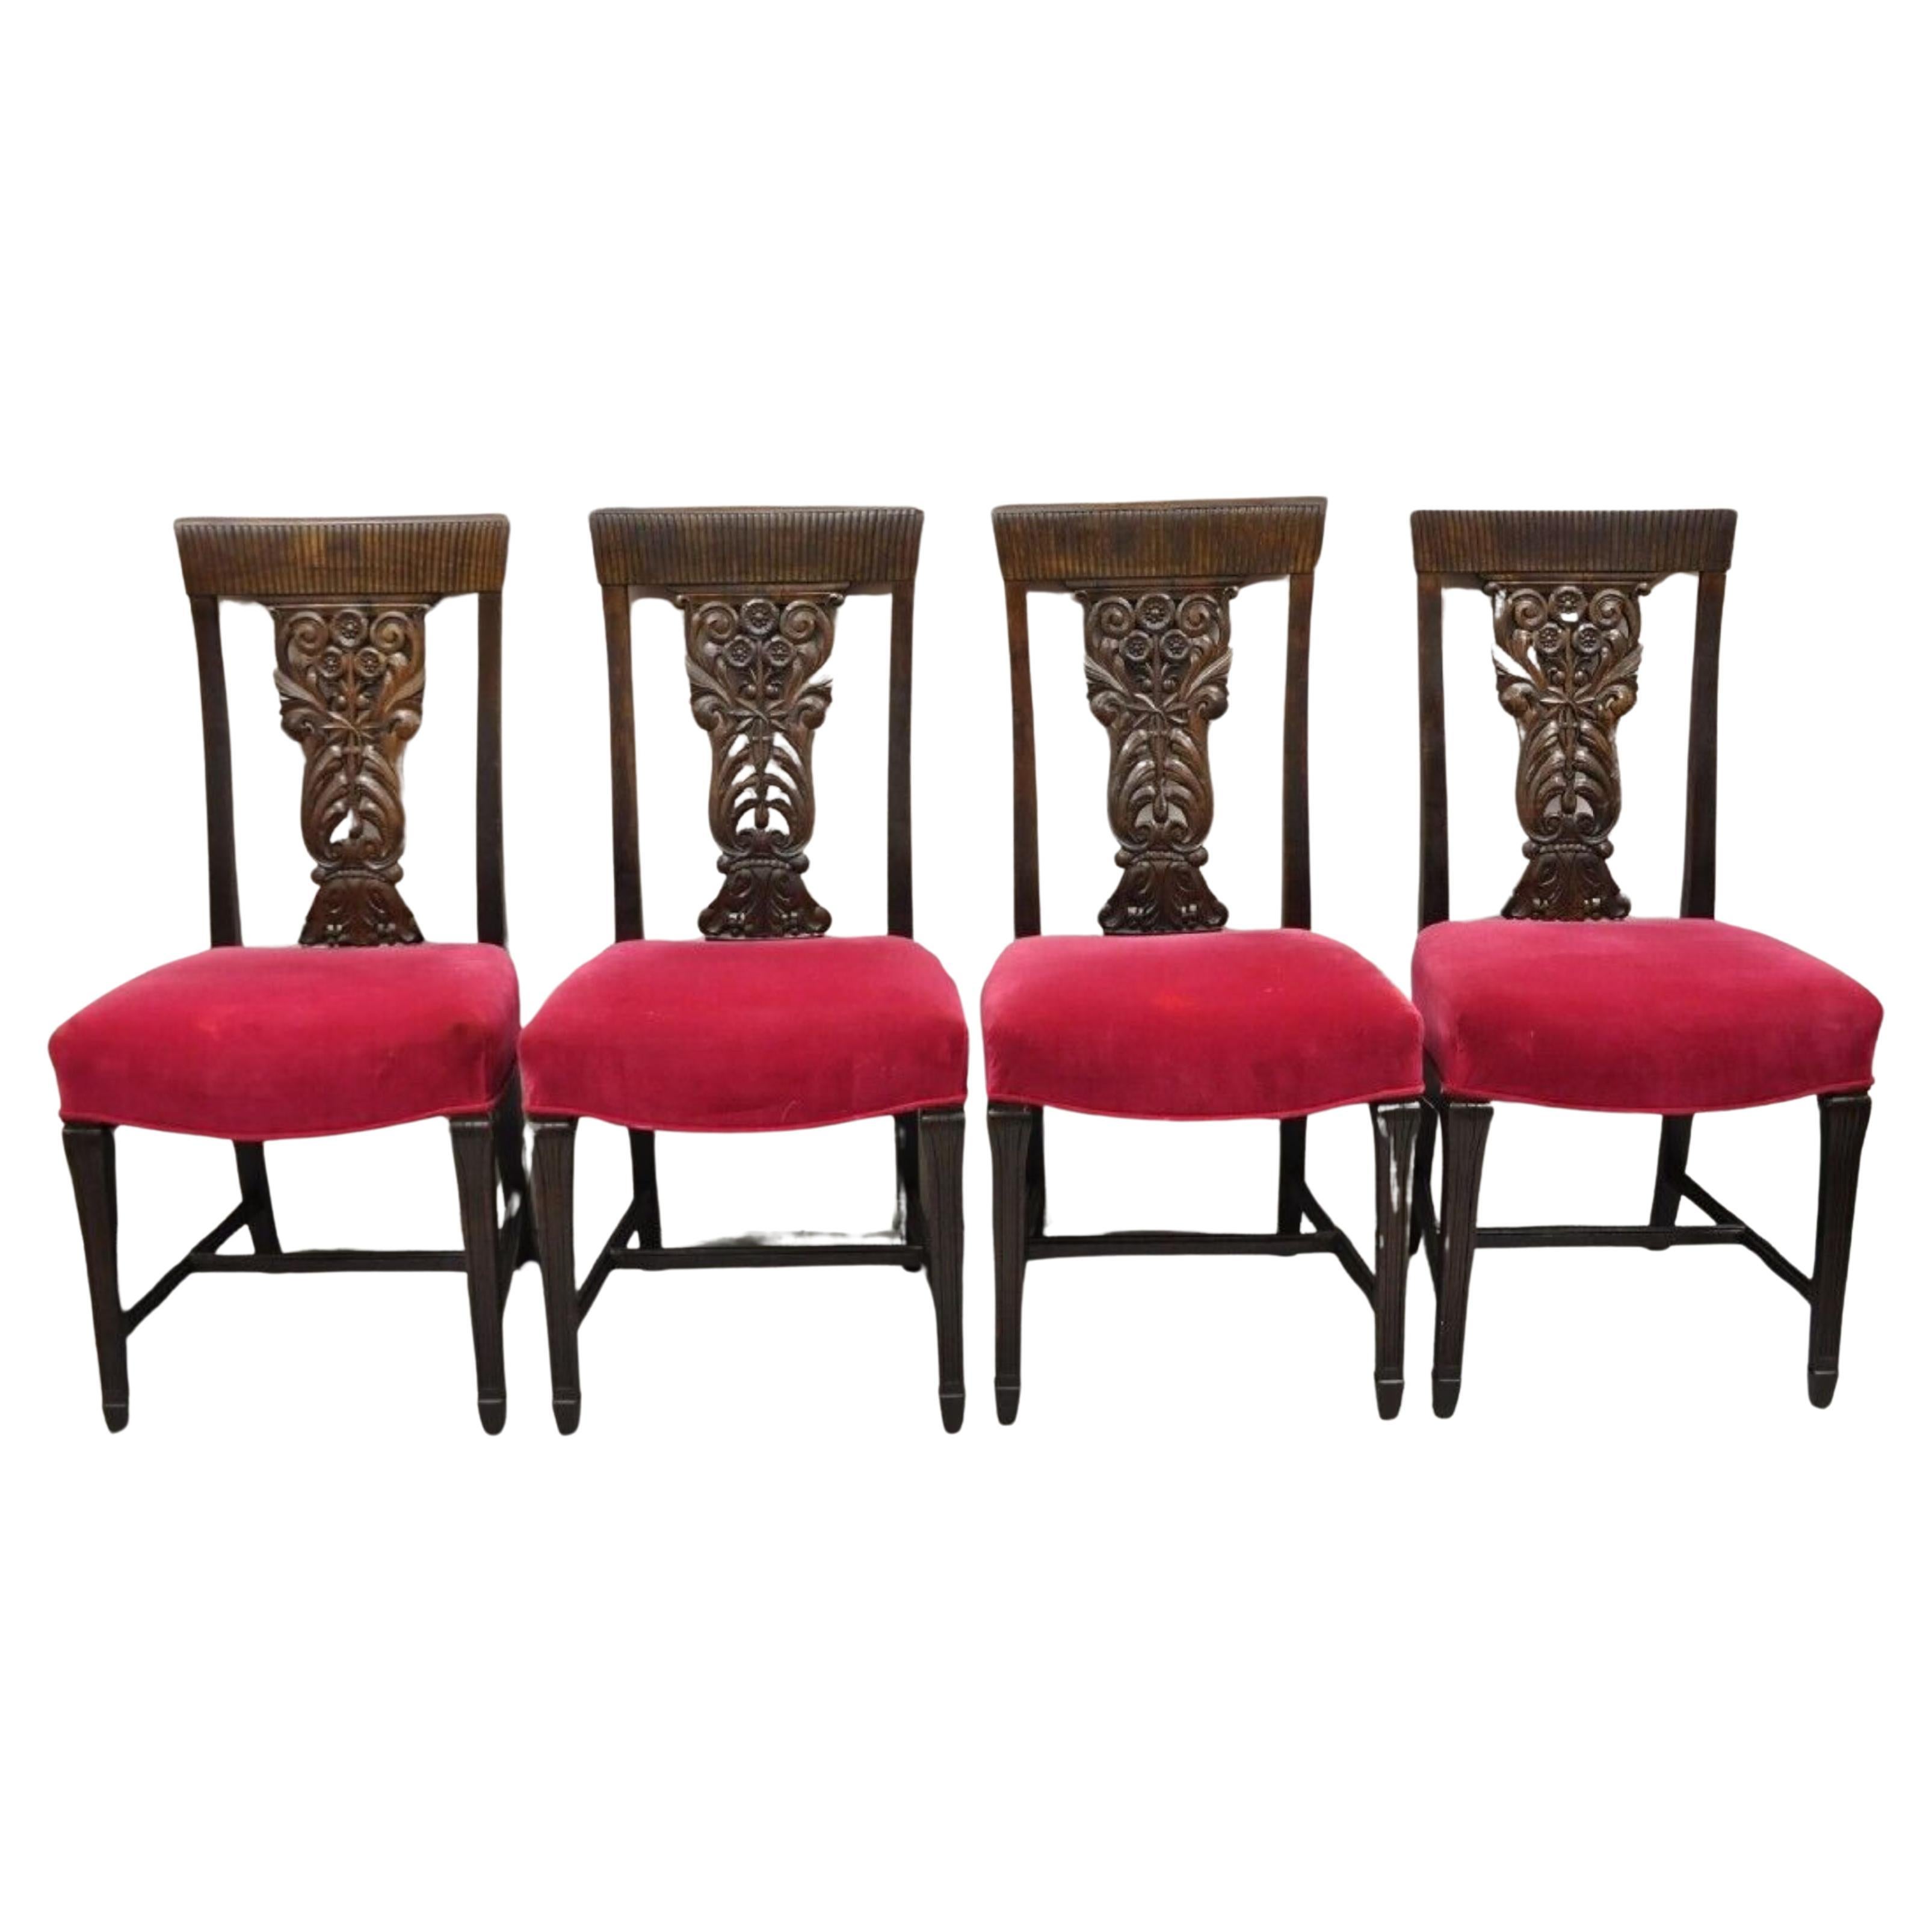 Antique Edwardian Floral Carved Mahogany Red Mohair Dining Chairs - Set of 4 For Sale